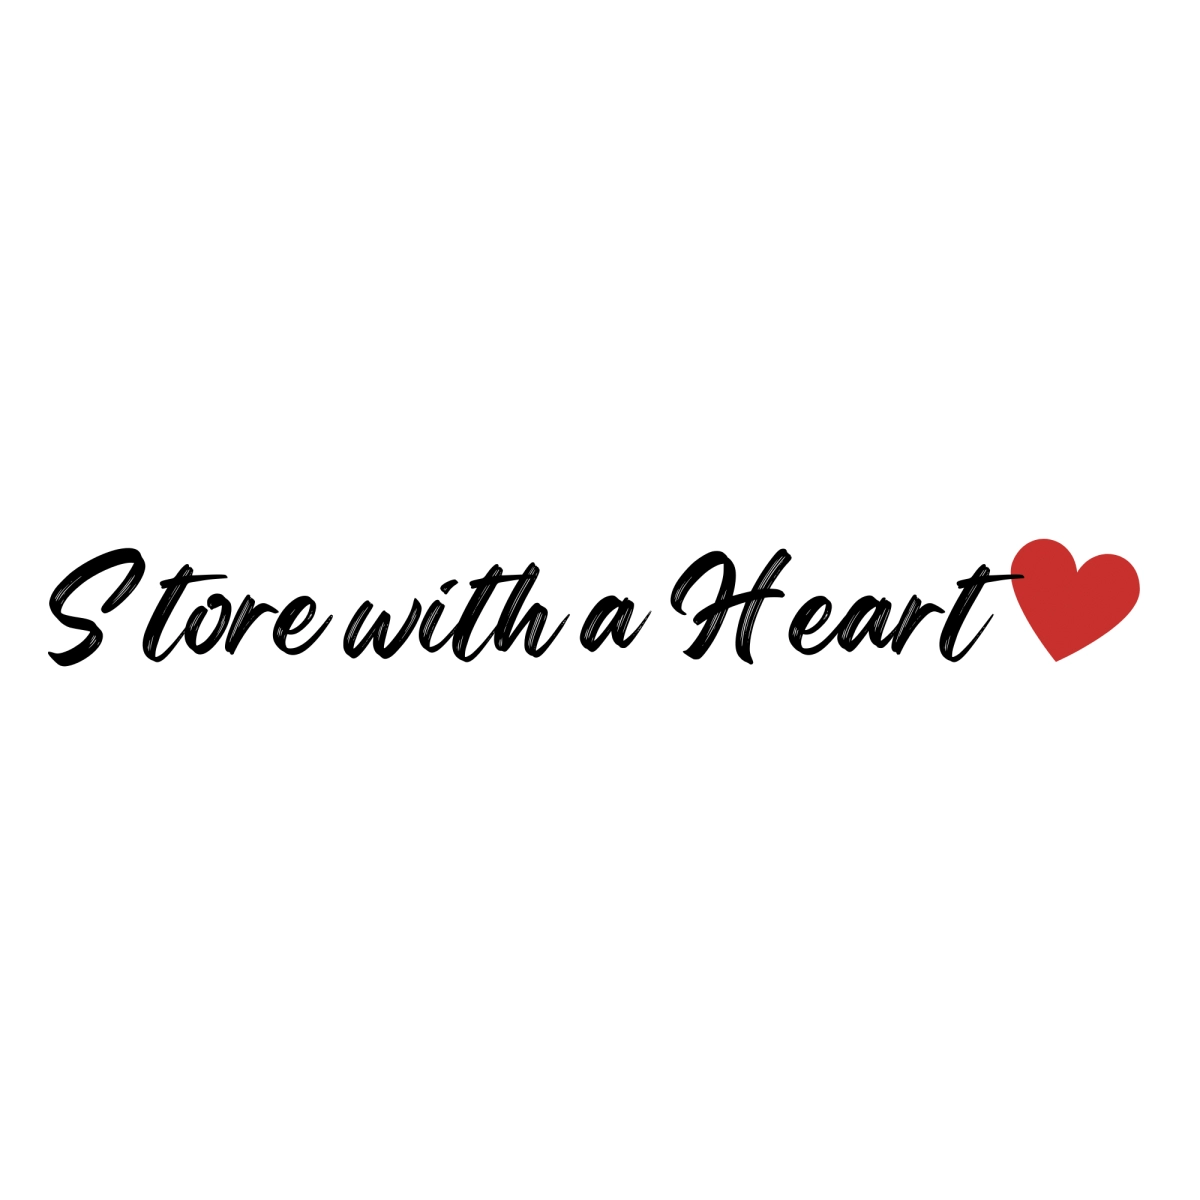 Store with a Hearts background